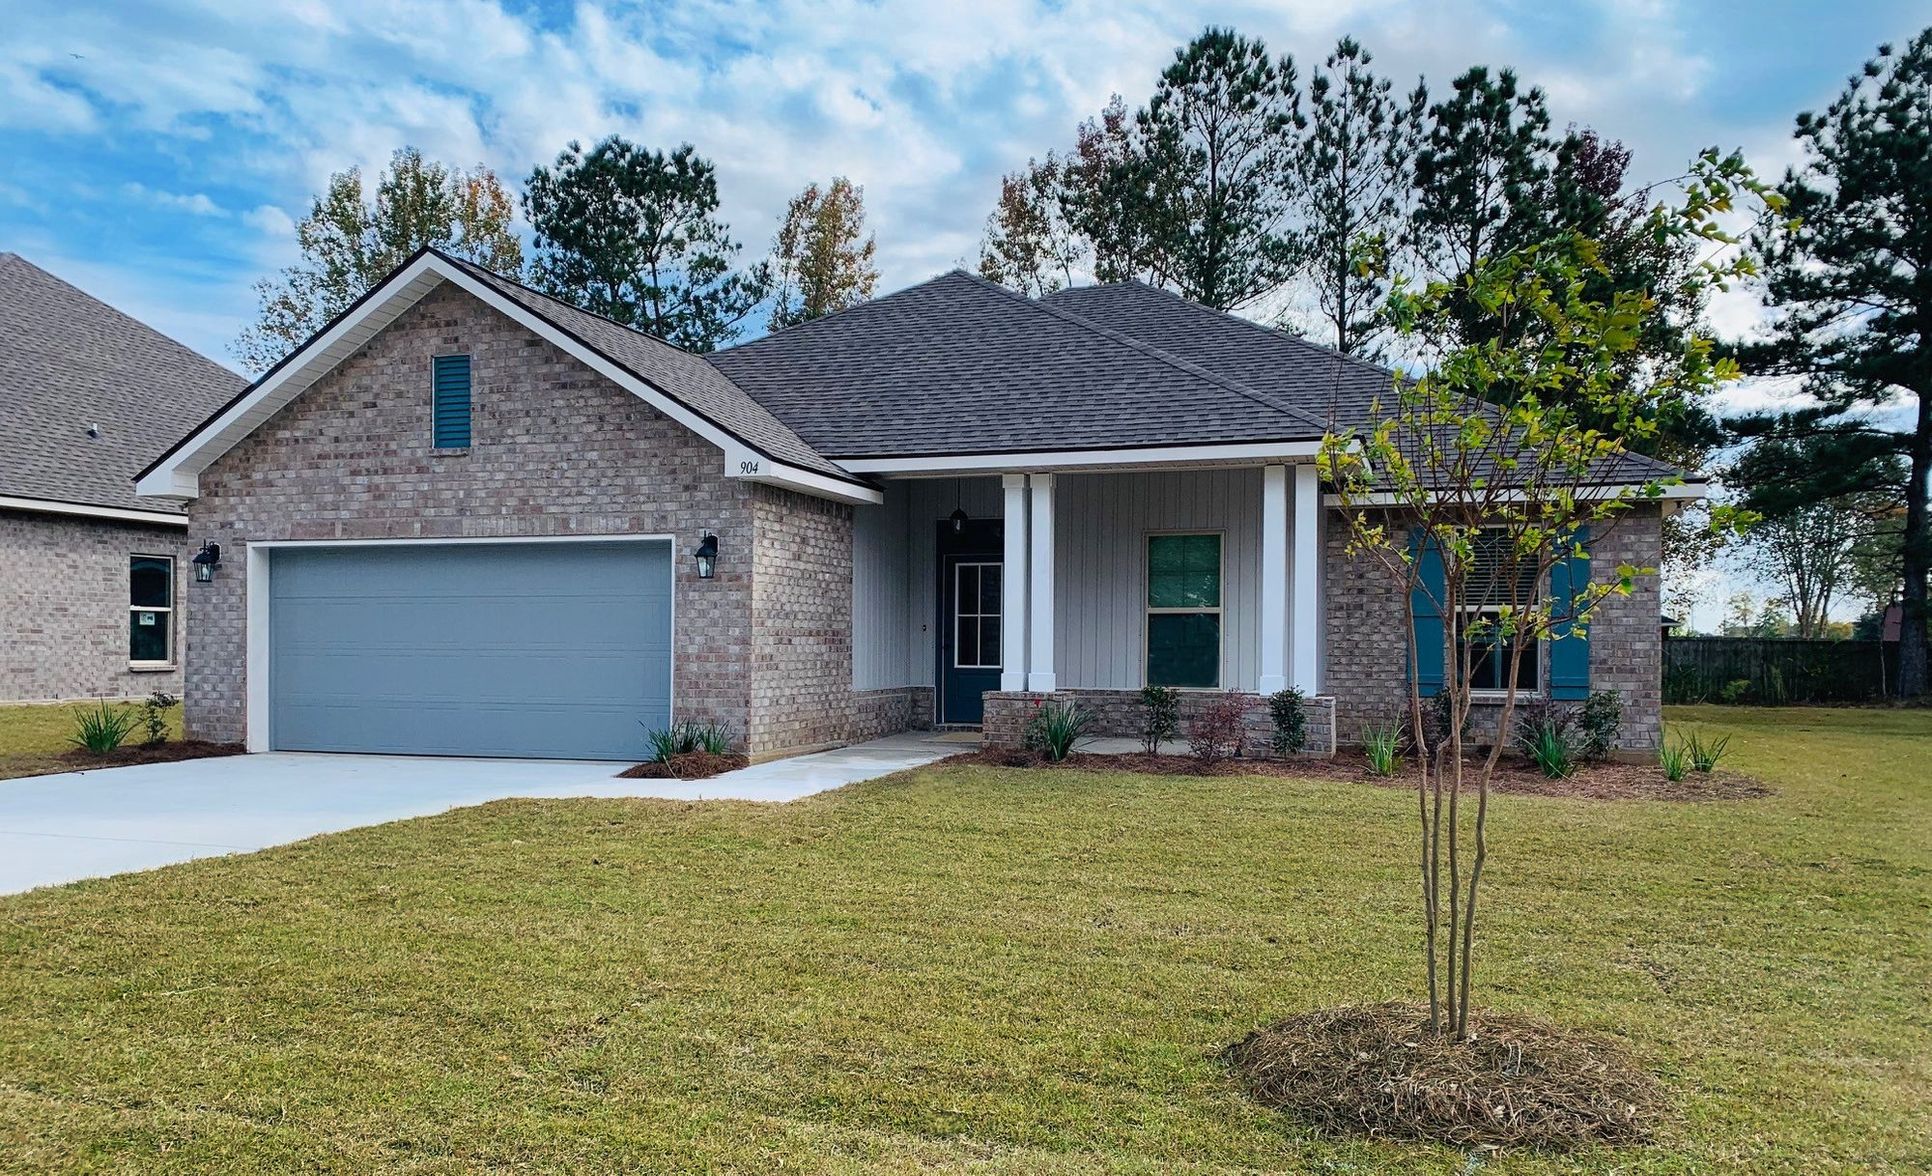 New Home Community of The Crescent At River Oaks in Foley, AL by DSLD Homes